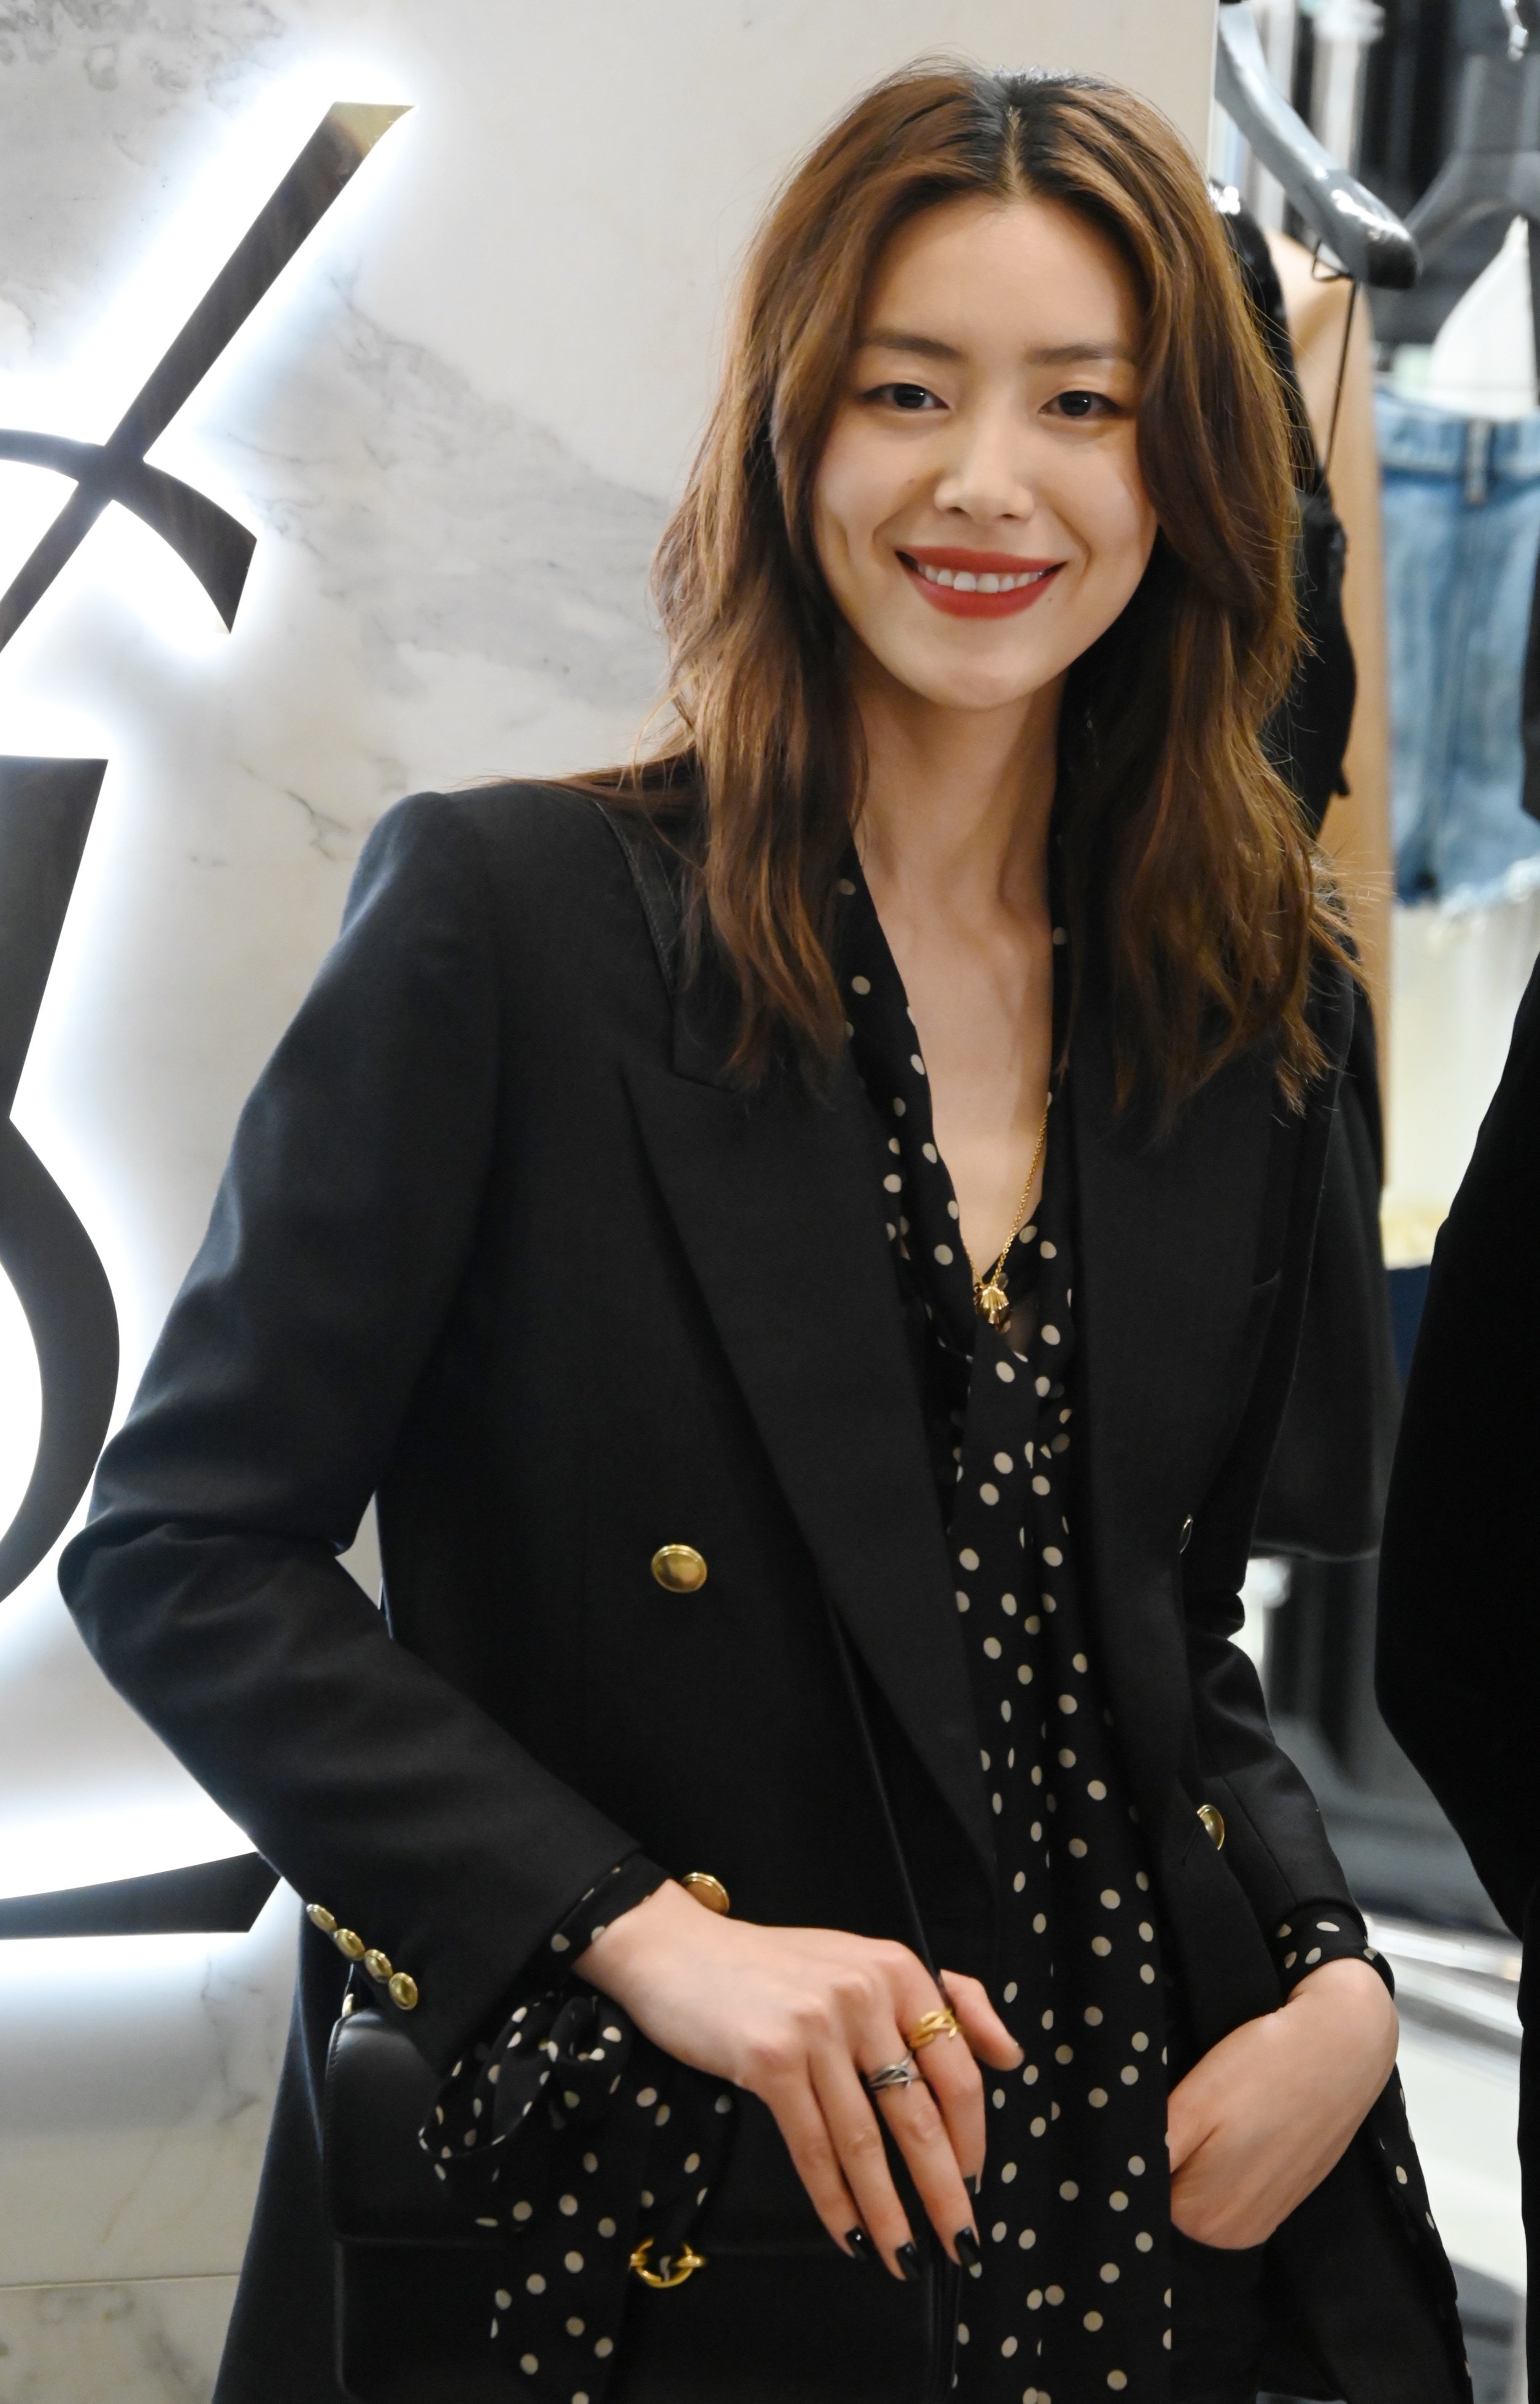 Liu Wen smiles at a YSL promotional event in March 2021